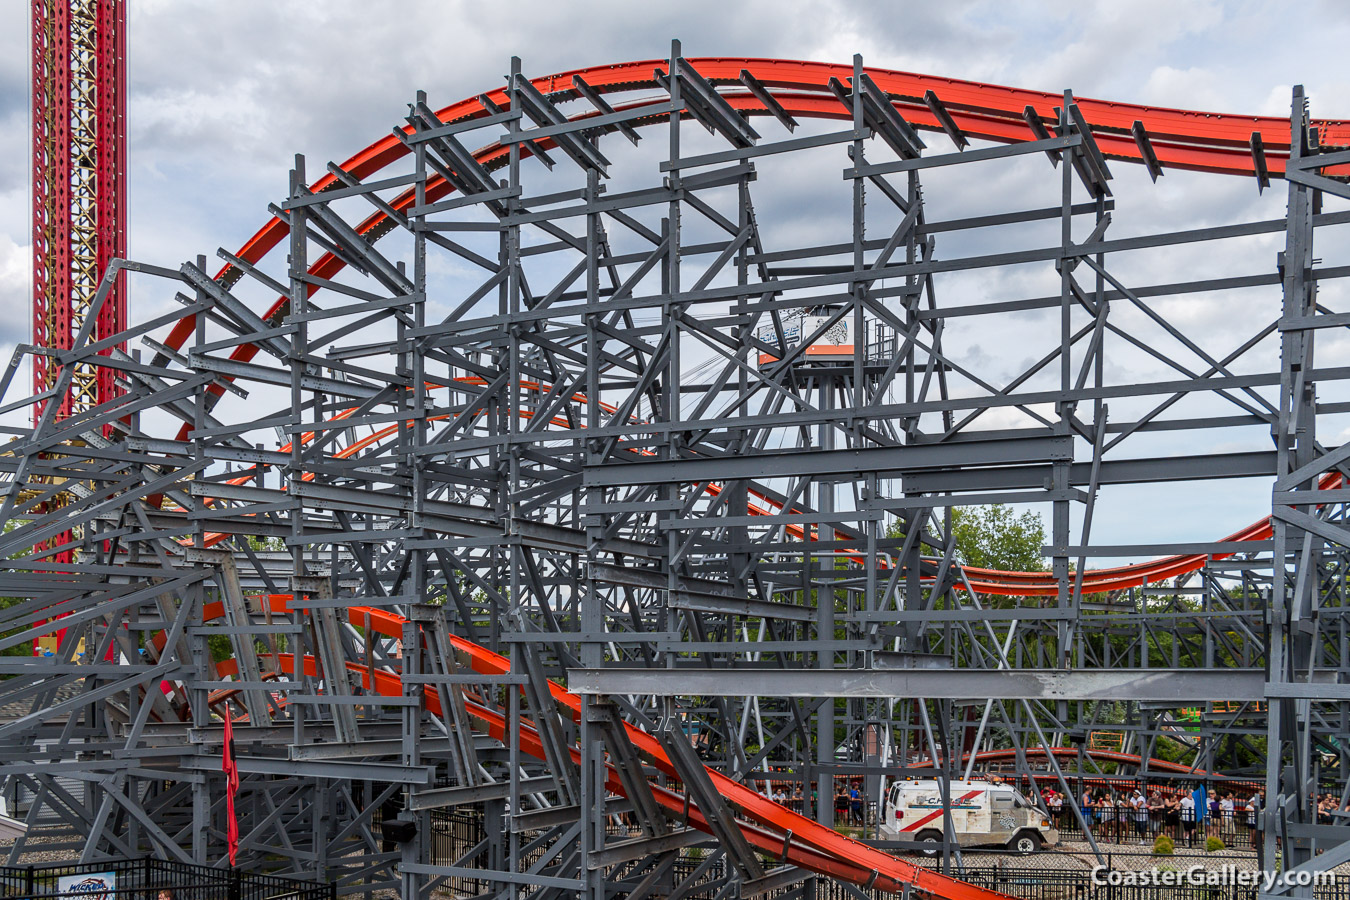 Metal support structure - Cyclone roller coaster at Six Flags New England